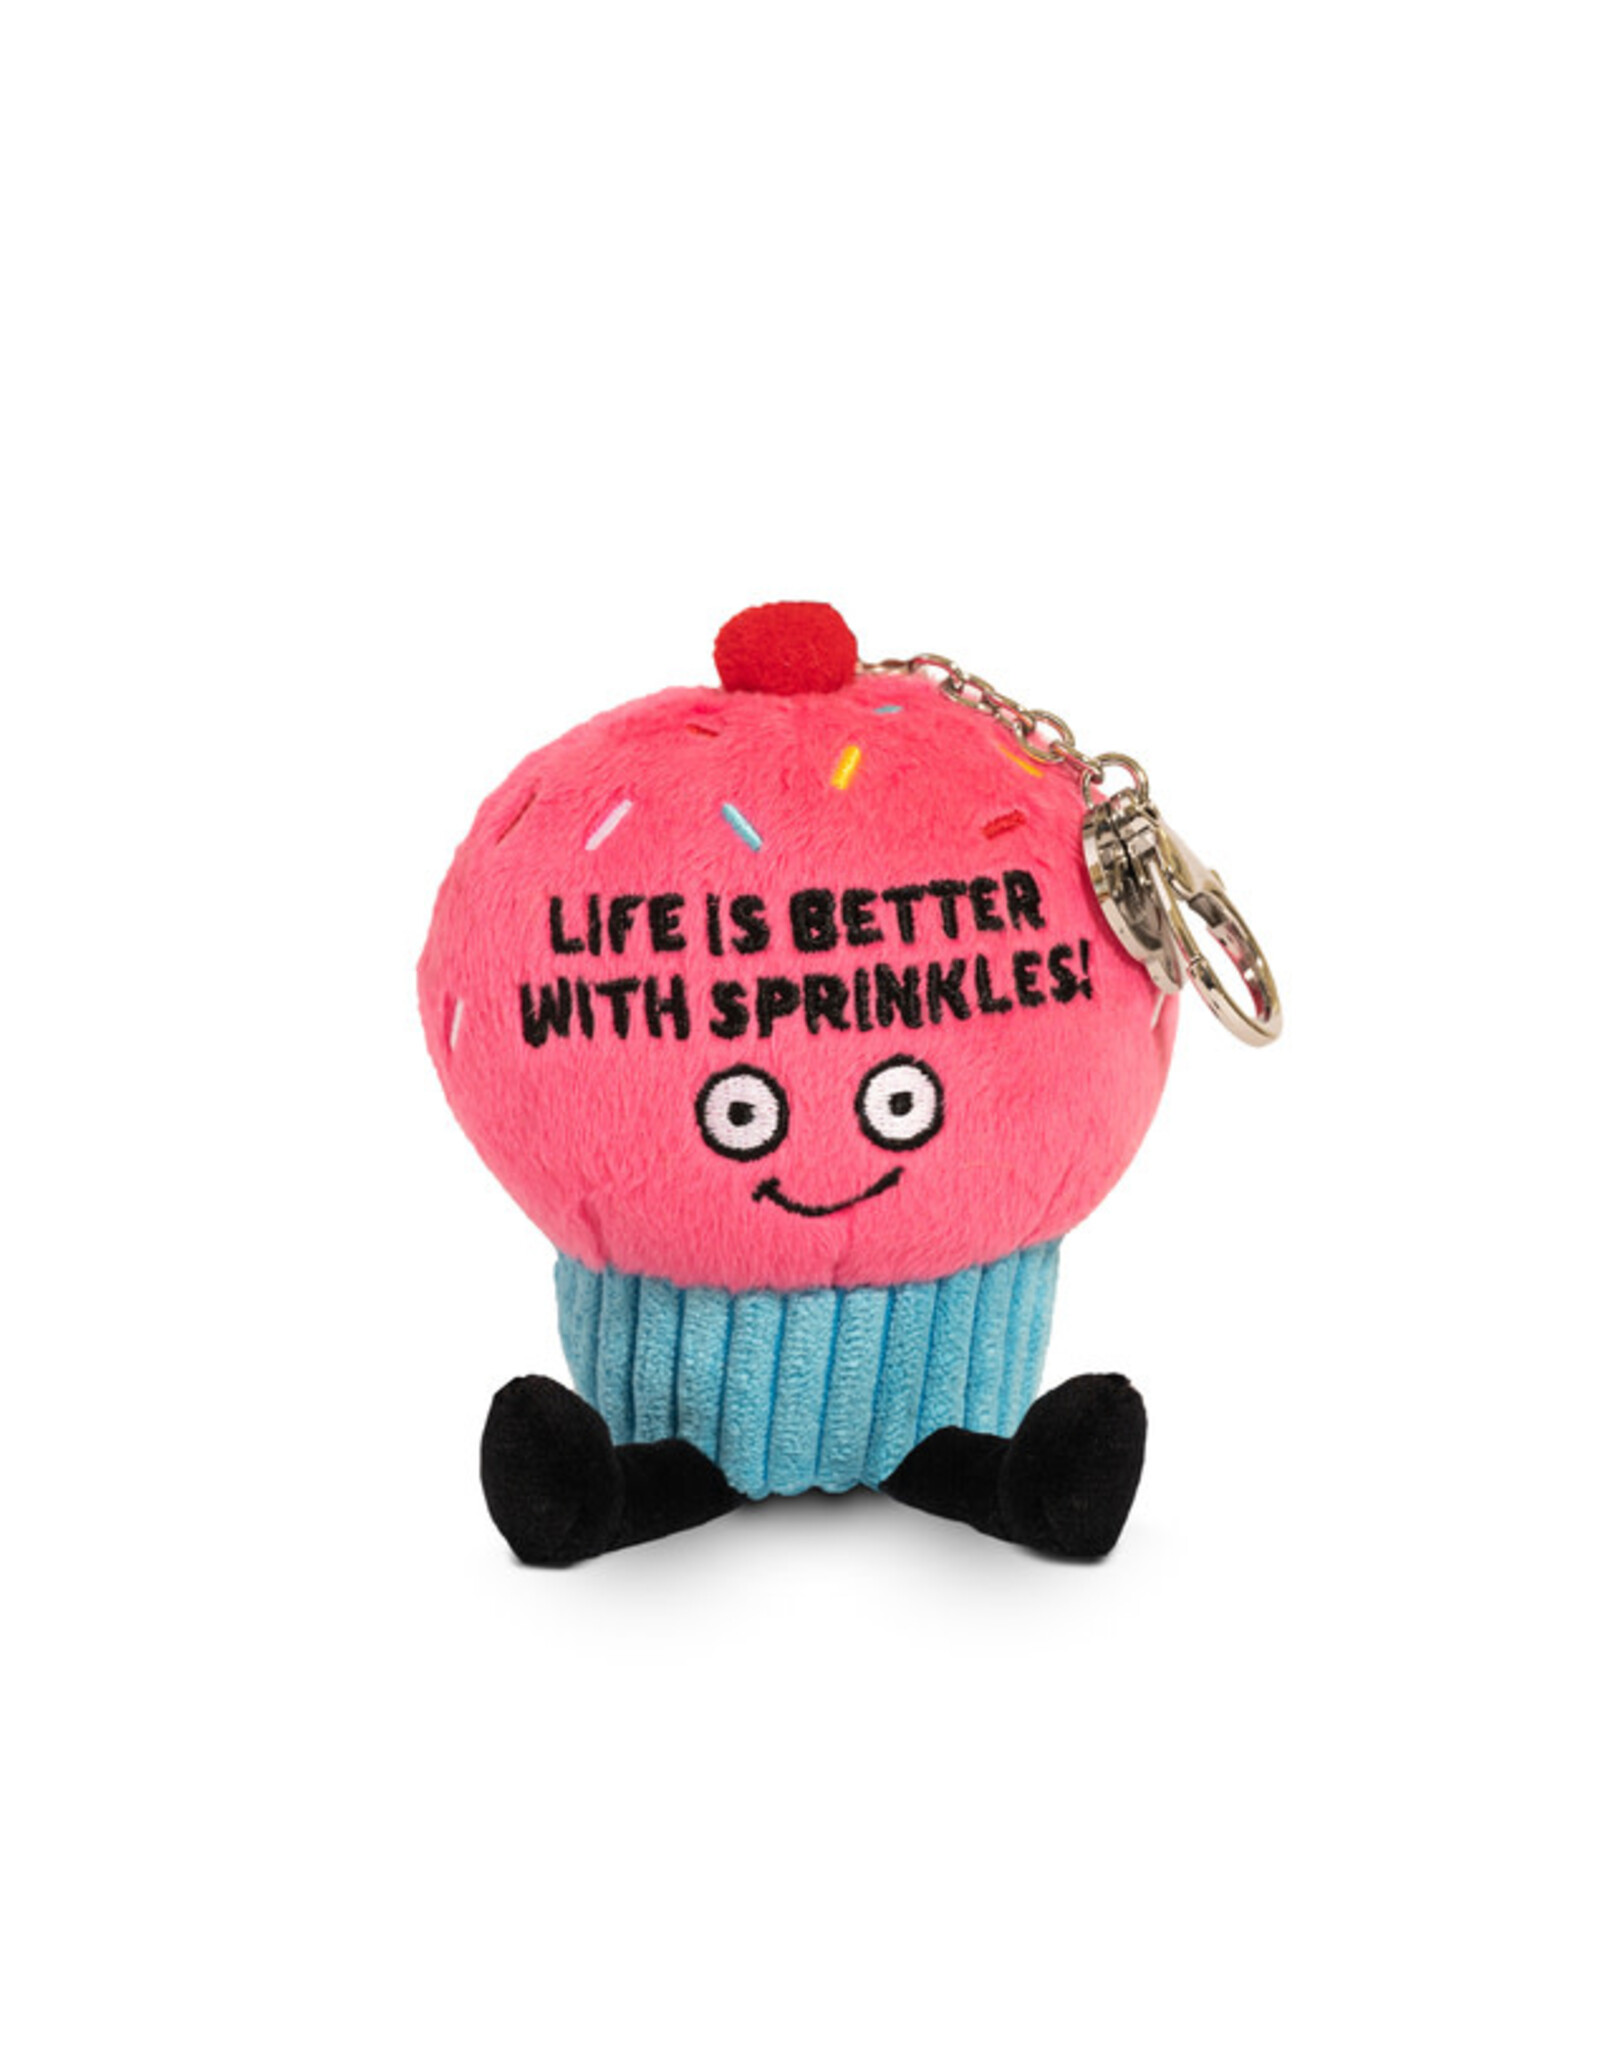 Punchkins Punchkins Bites Life is Better With Sprinkles Cupcake Bag Charm